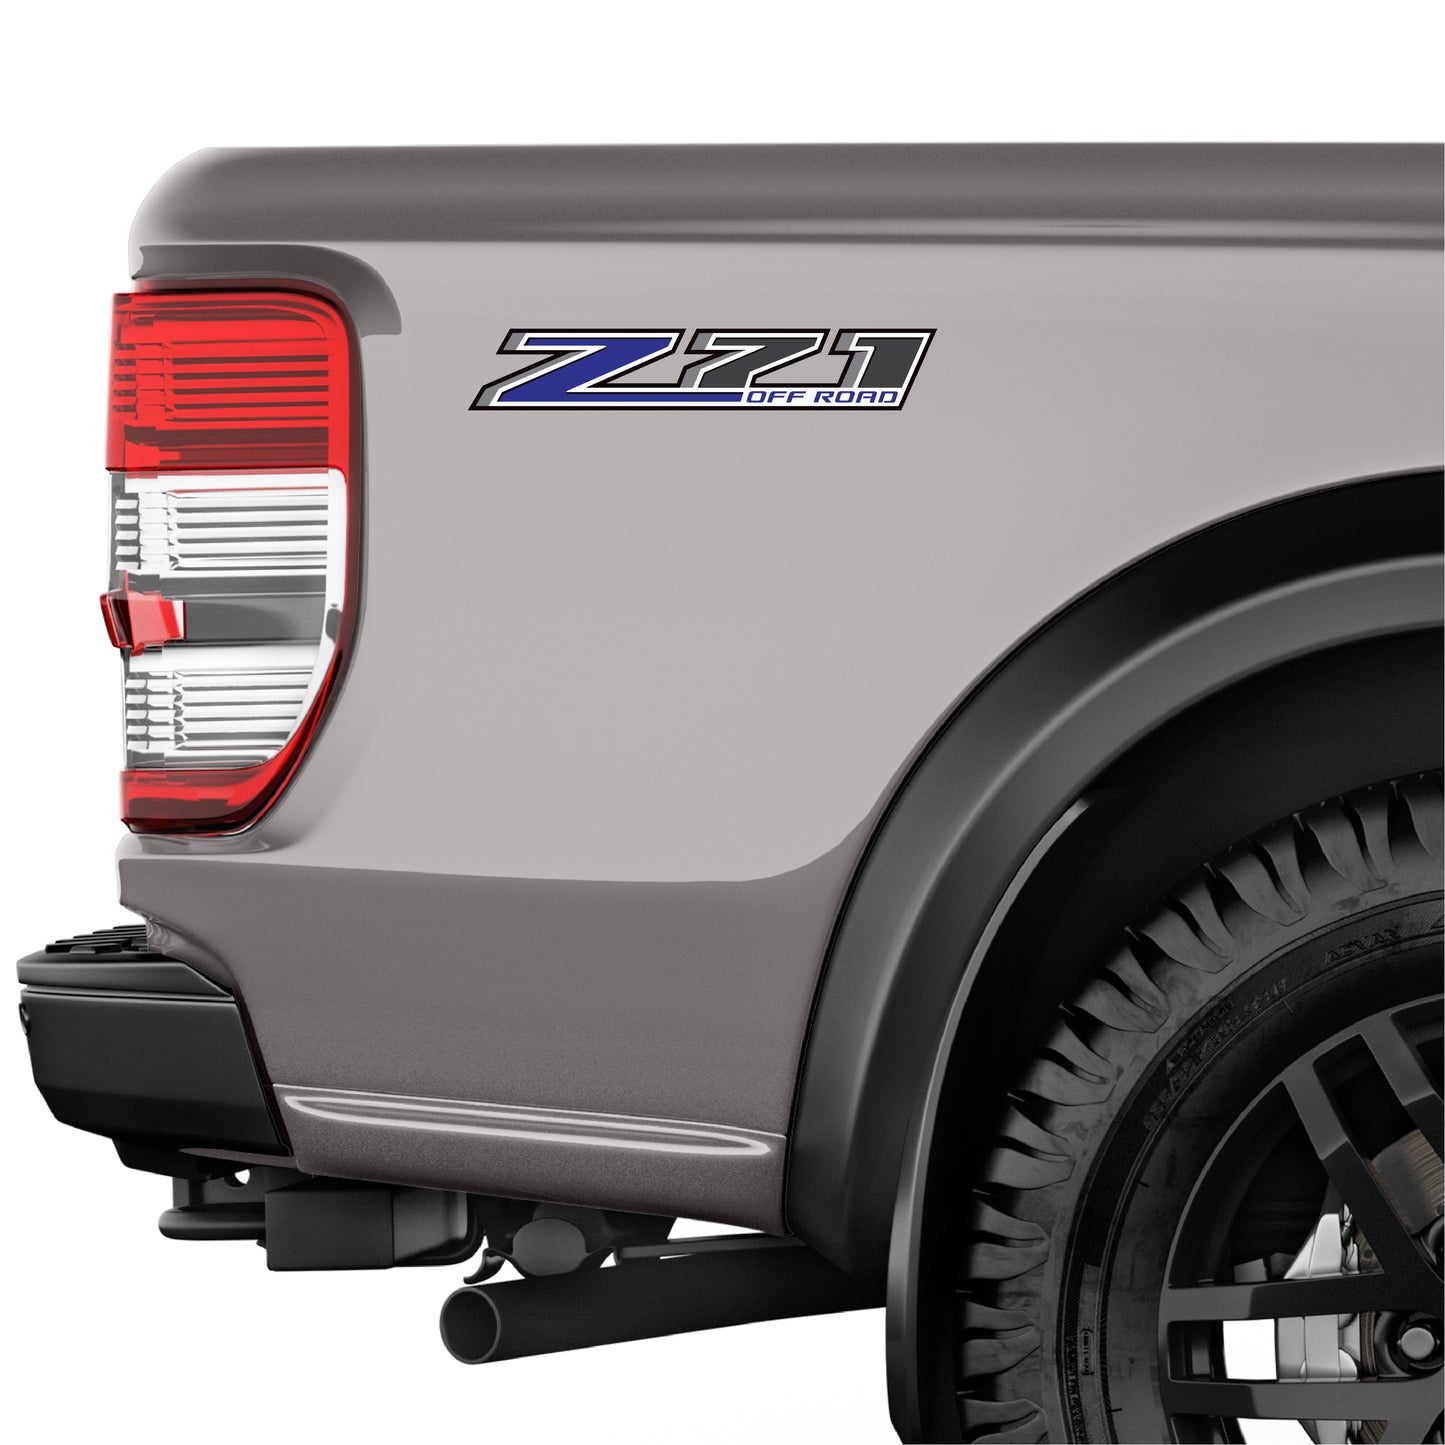 Z71 Offroad Truck Decals Blue - 2014-2018 Bedside Stickers - TiresFX